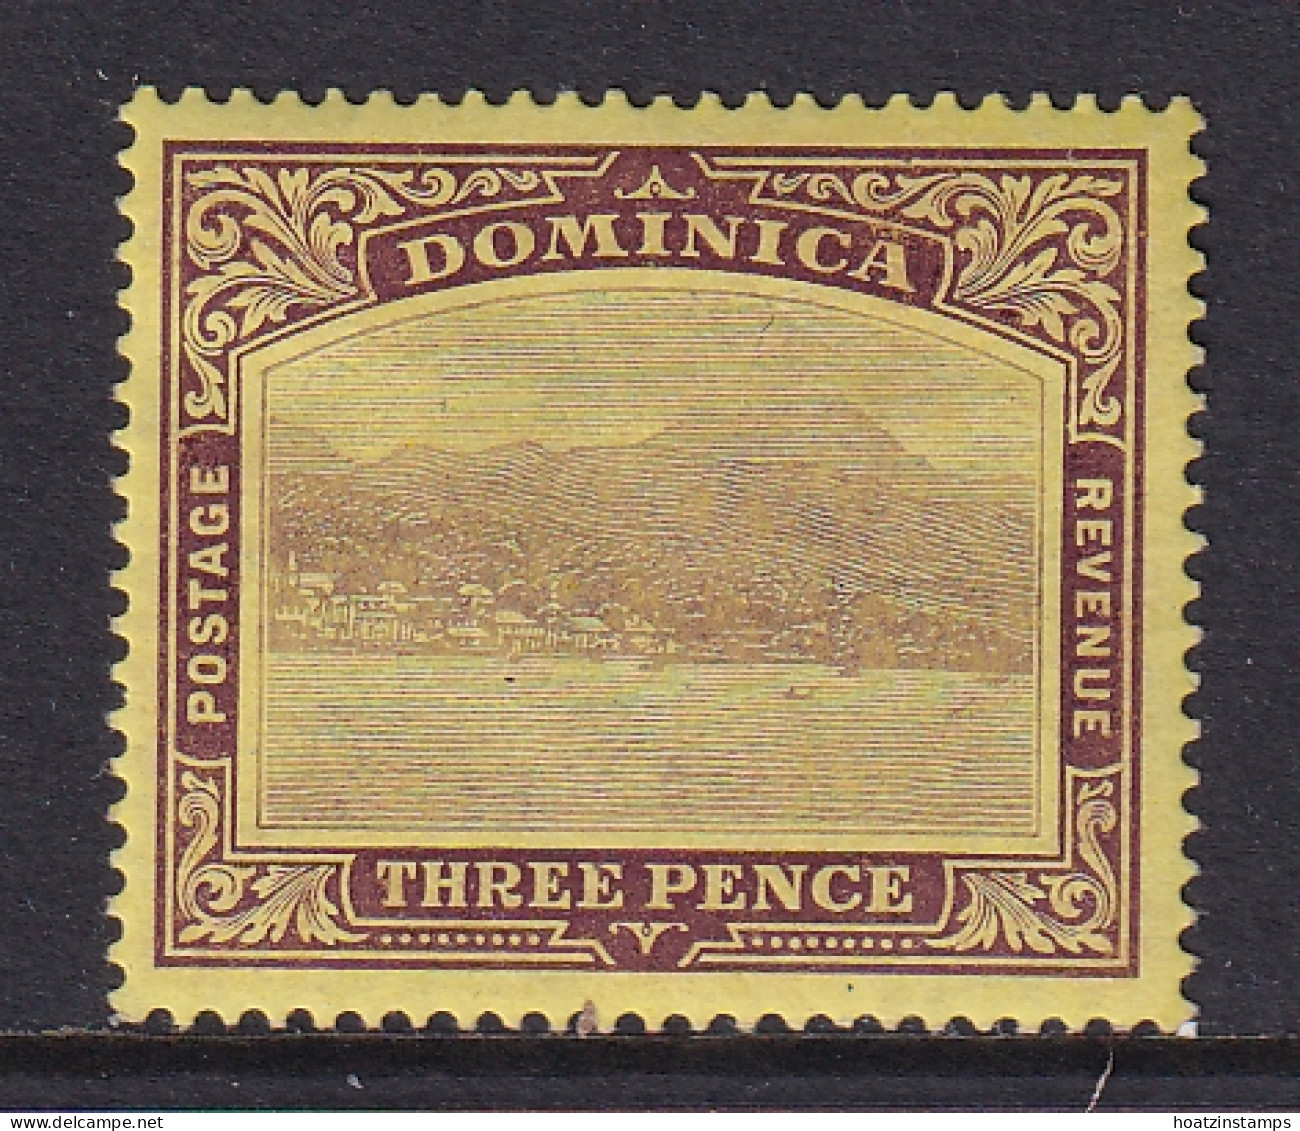 Dominica: 1908/20   Rouseau From The Sea    SG51    3d   Purple/yellow      MH - Dominica (...-1978)